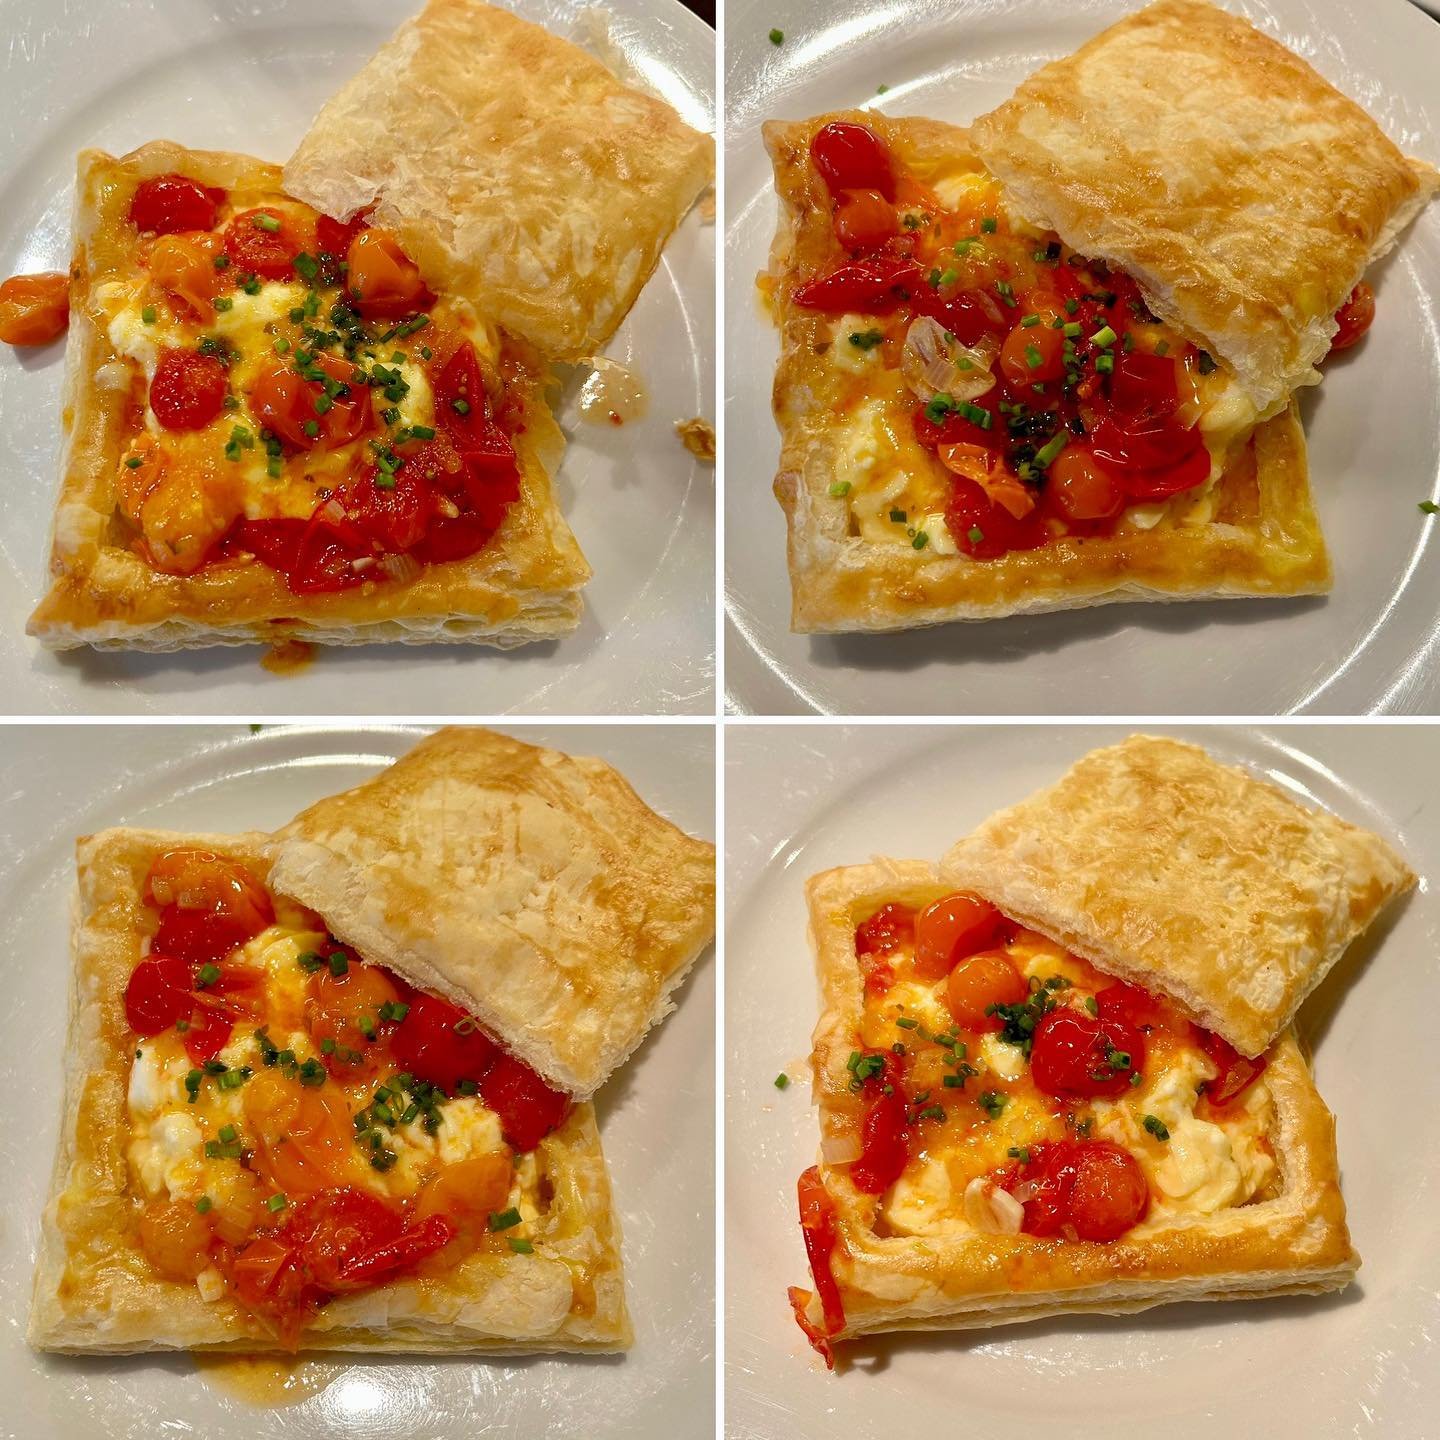 Something new!  Took a @foodandwine recipe and morphed it into breakfast!  Puff pastry boats with goat cheese scrambled eggs with confit cherry tomatoes!  #newbreakfastrecipe #bedandbreakfast #napavalley #winecountry #visitnapavalley #visitcalistoga 